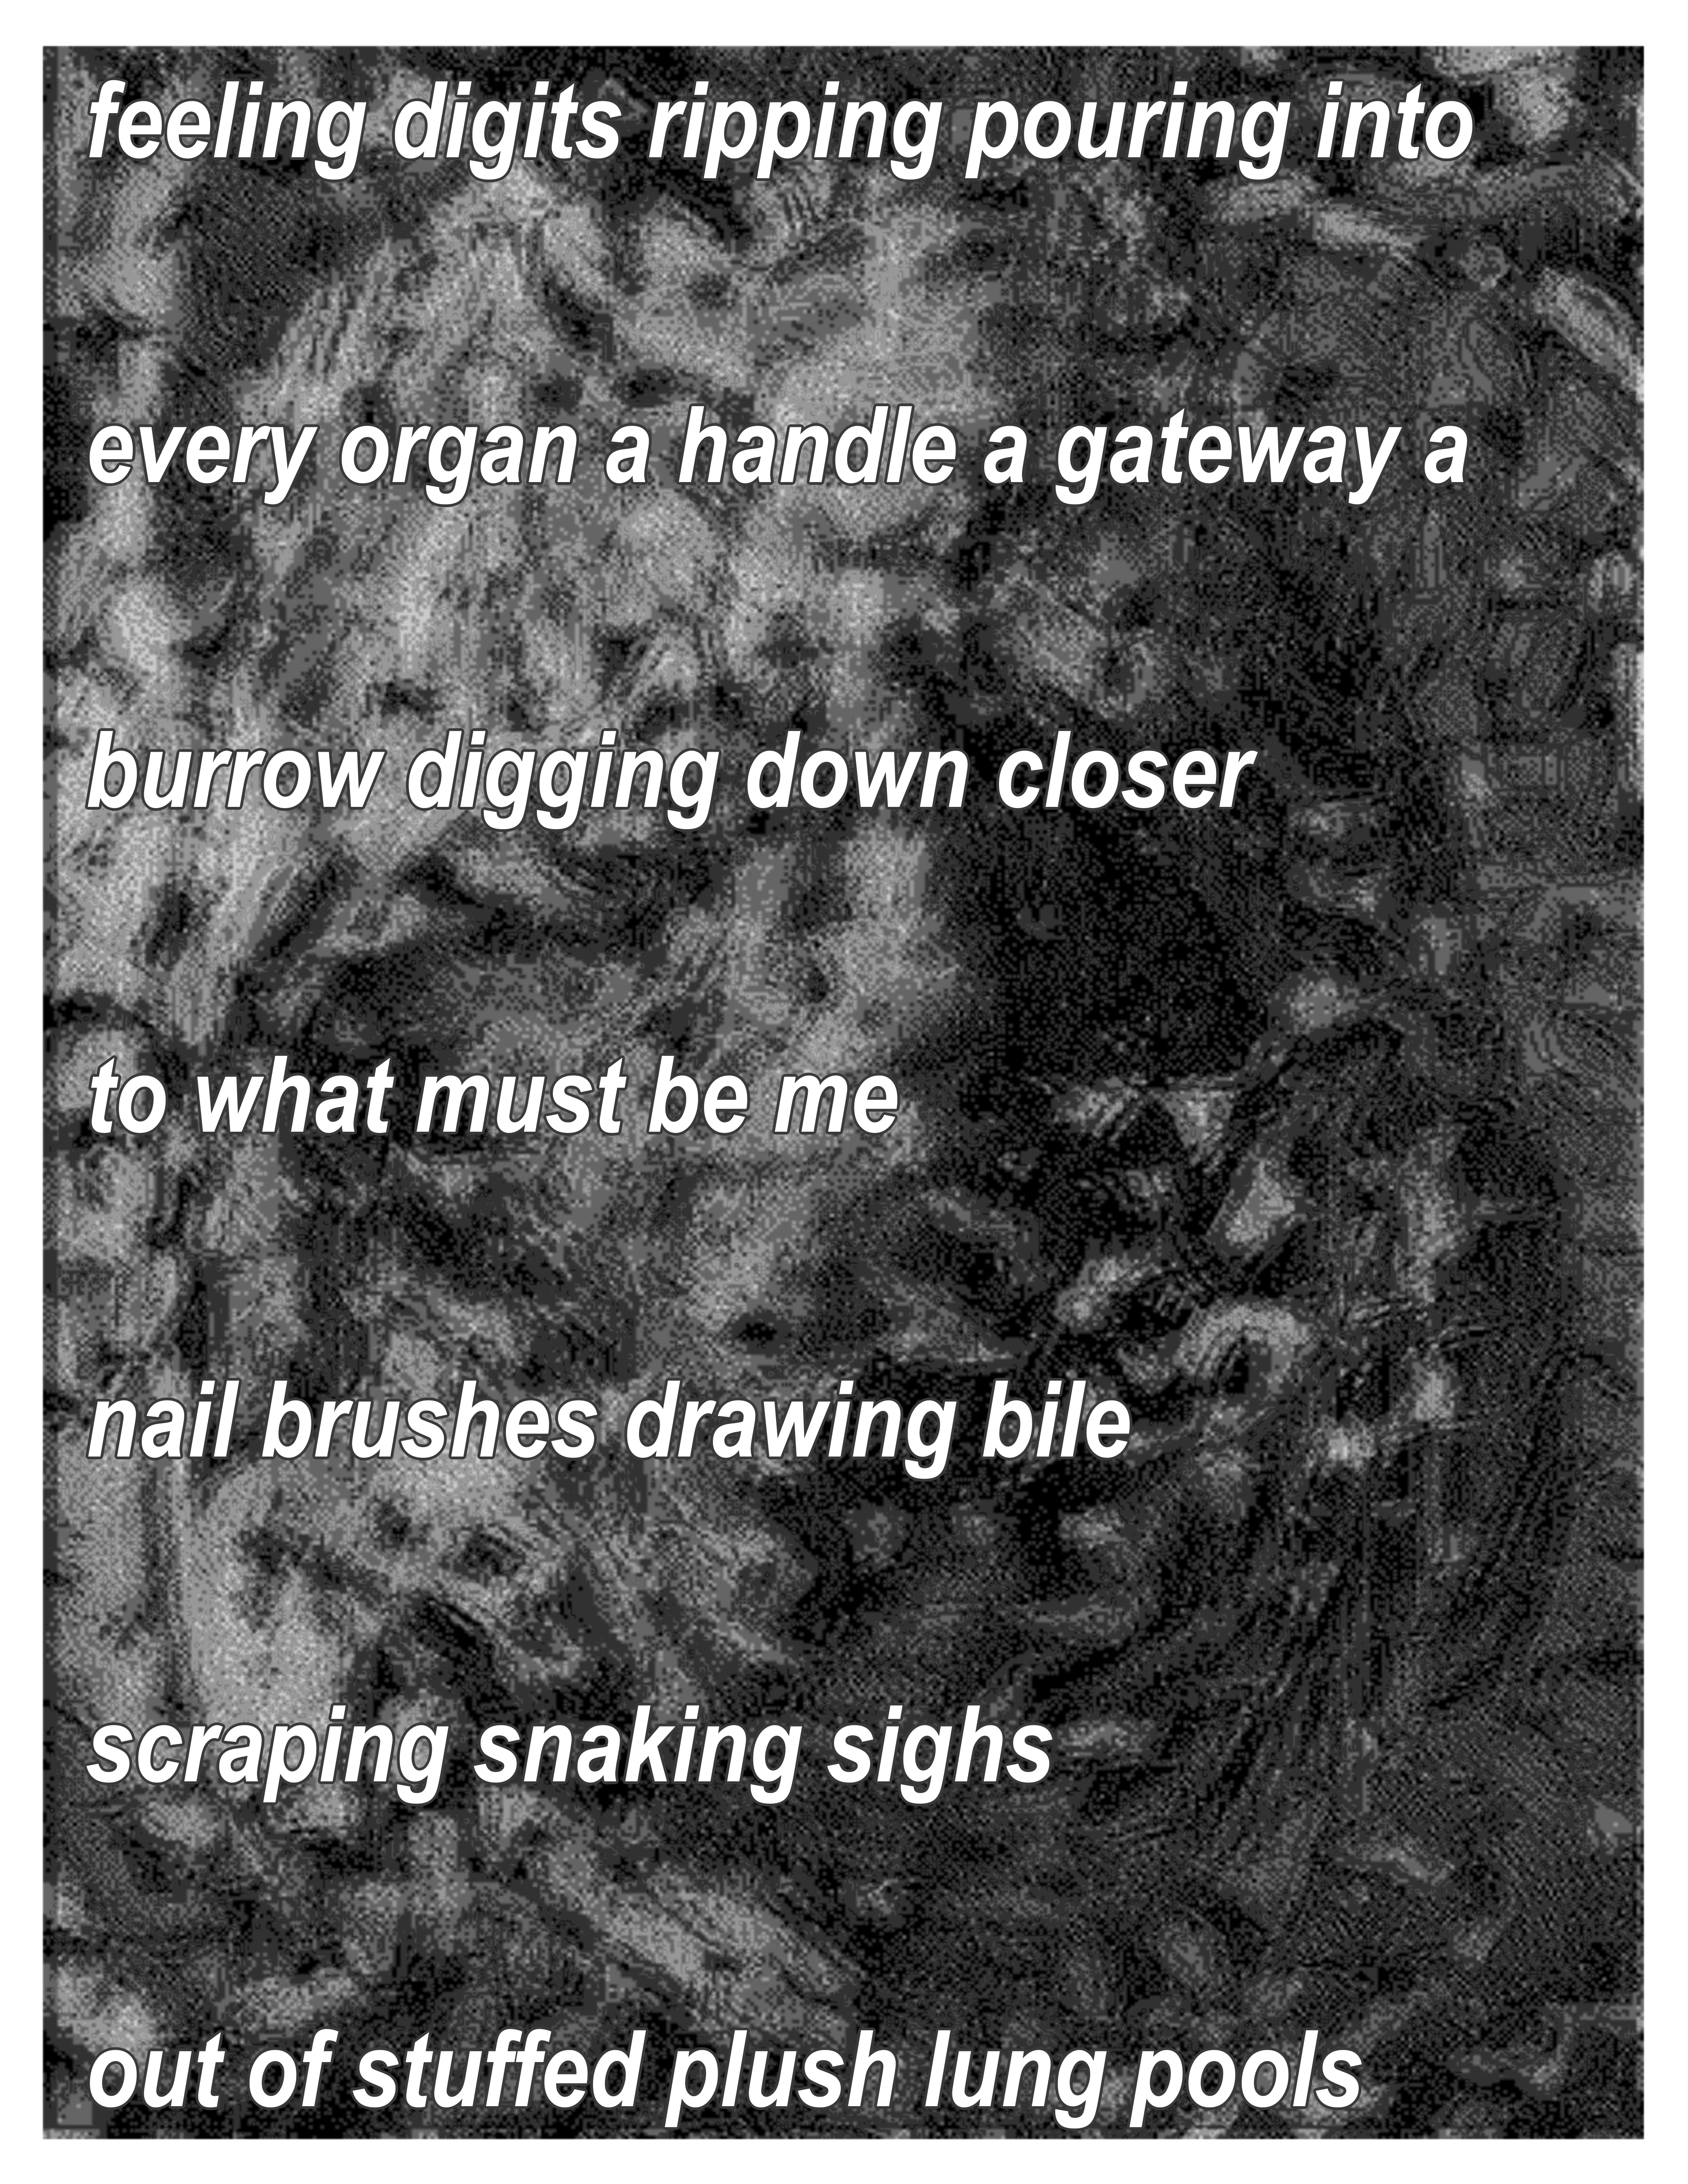 Text saying 'feeling digits ripping pouring into / every organ a handle a gateway a / burrow digging down closer / to what must be me / nail brushes drawing bile / scraping snaking sighs / out of stuffed plush lung pools' The text is overlaid on a glitchy image of a torso's internal organs with slight chromatic abberation applied